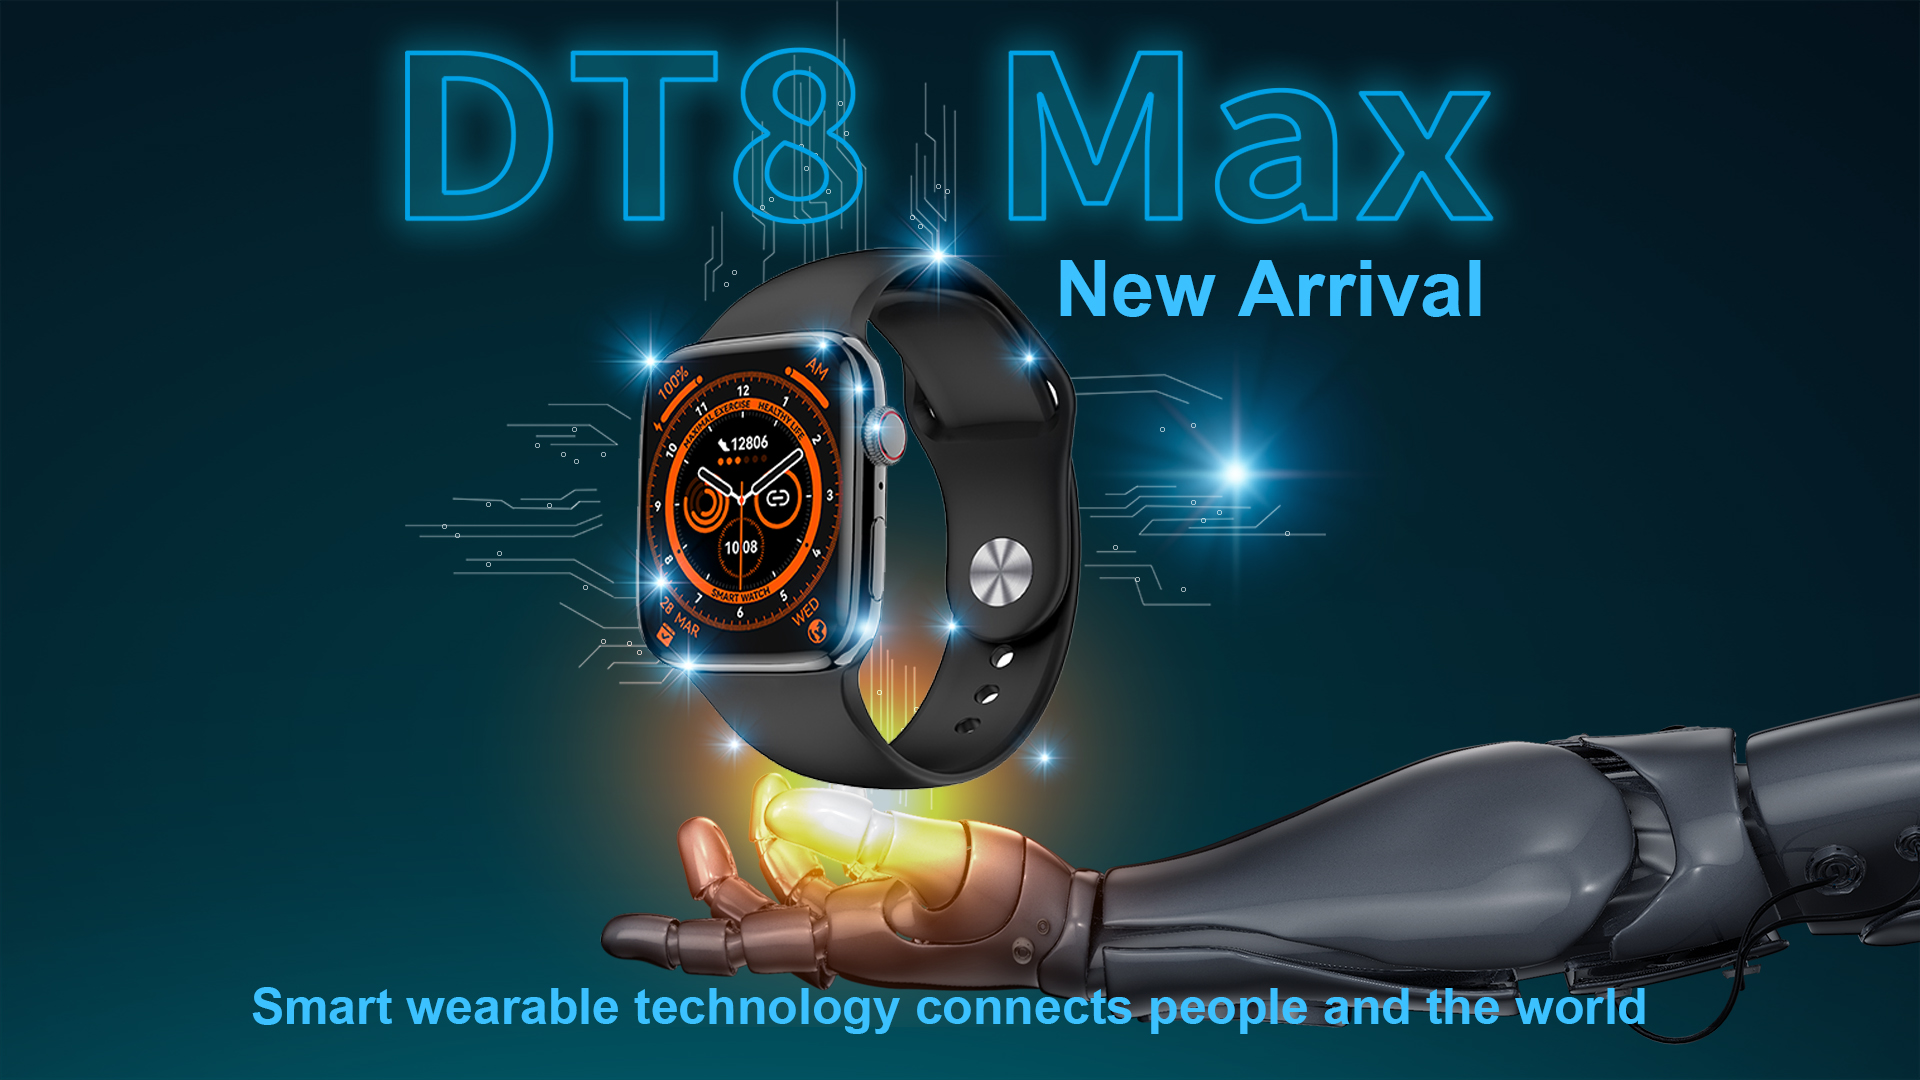 New Arrival dt8max 2.0-inch large-screen smartwatch that can play games